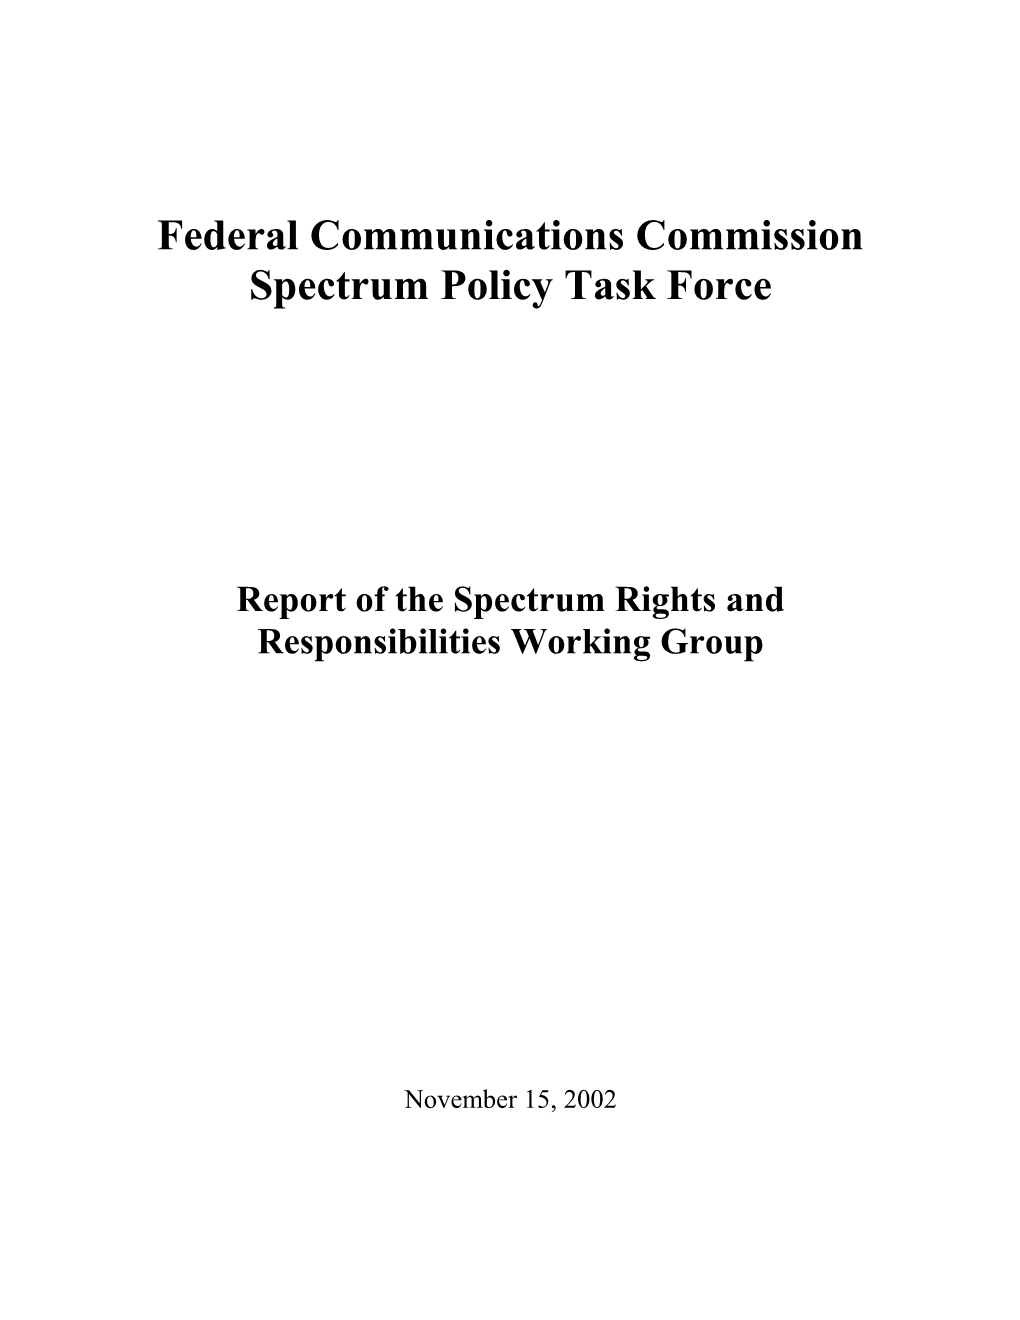 Spectrum Policy Task Force